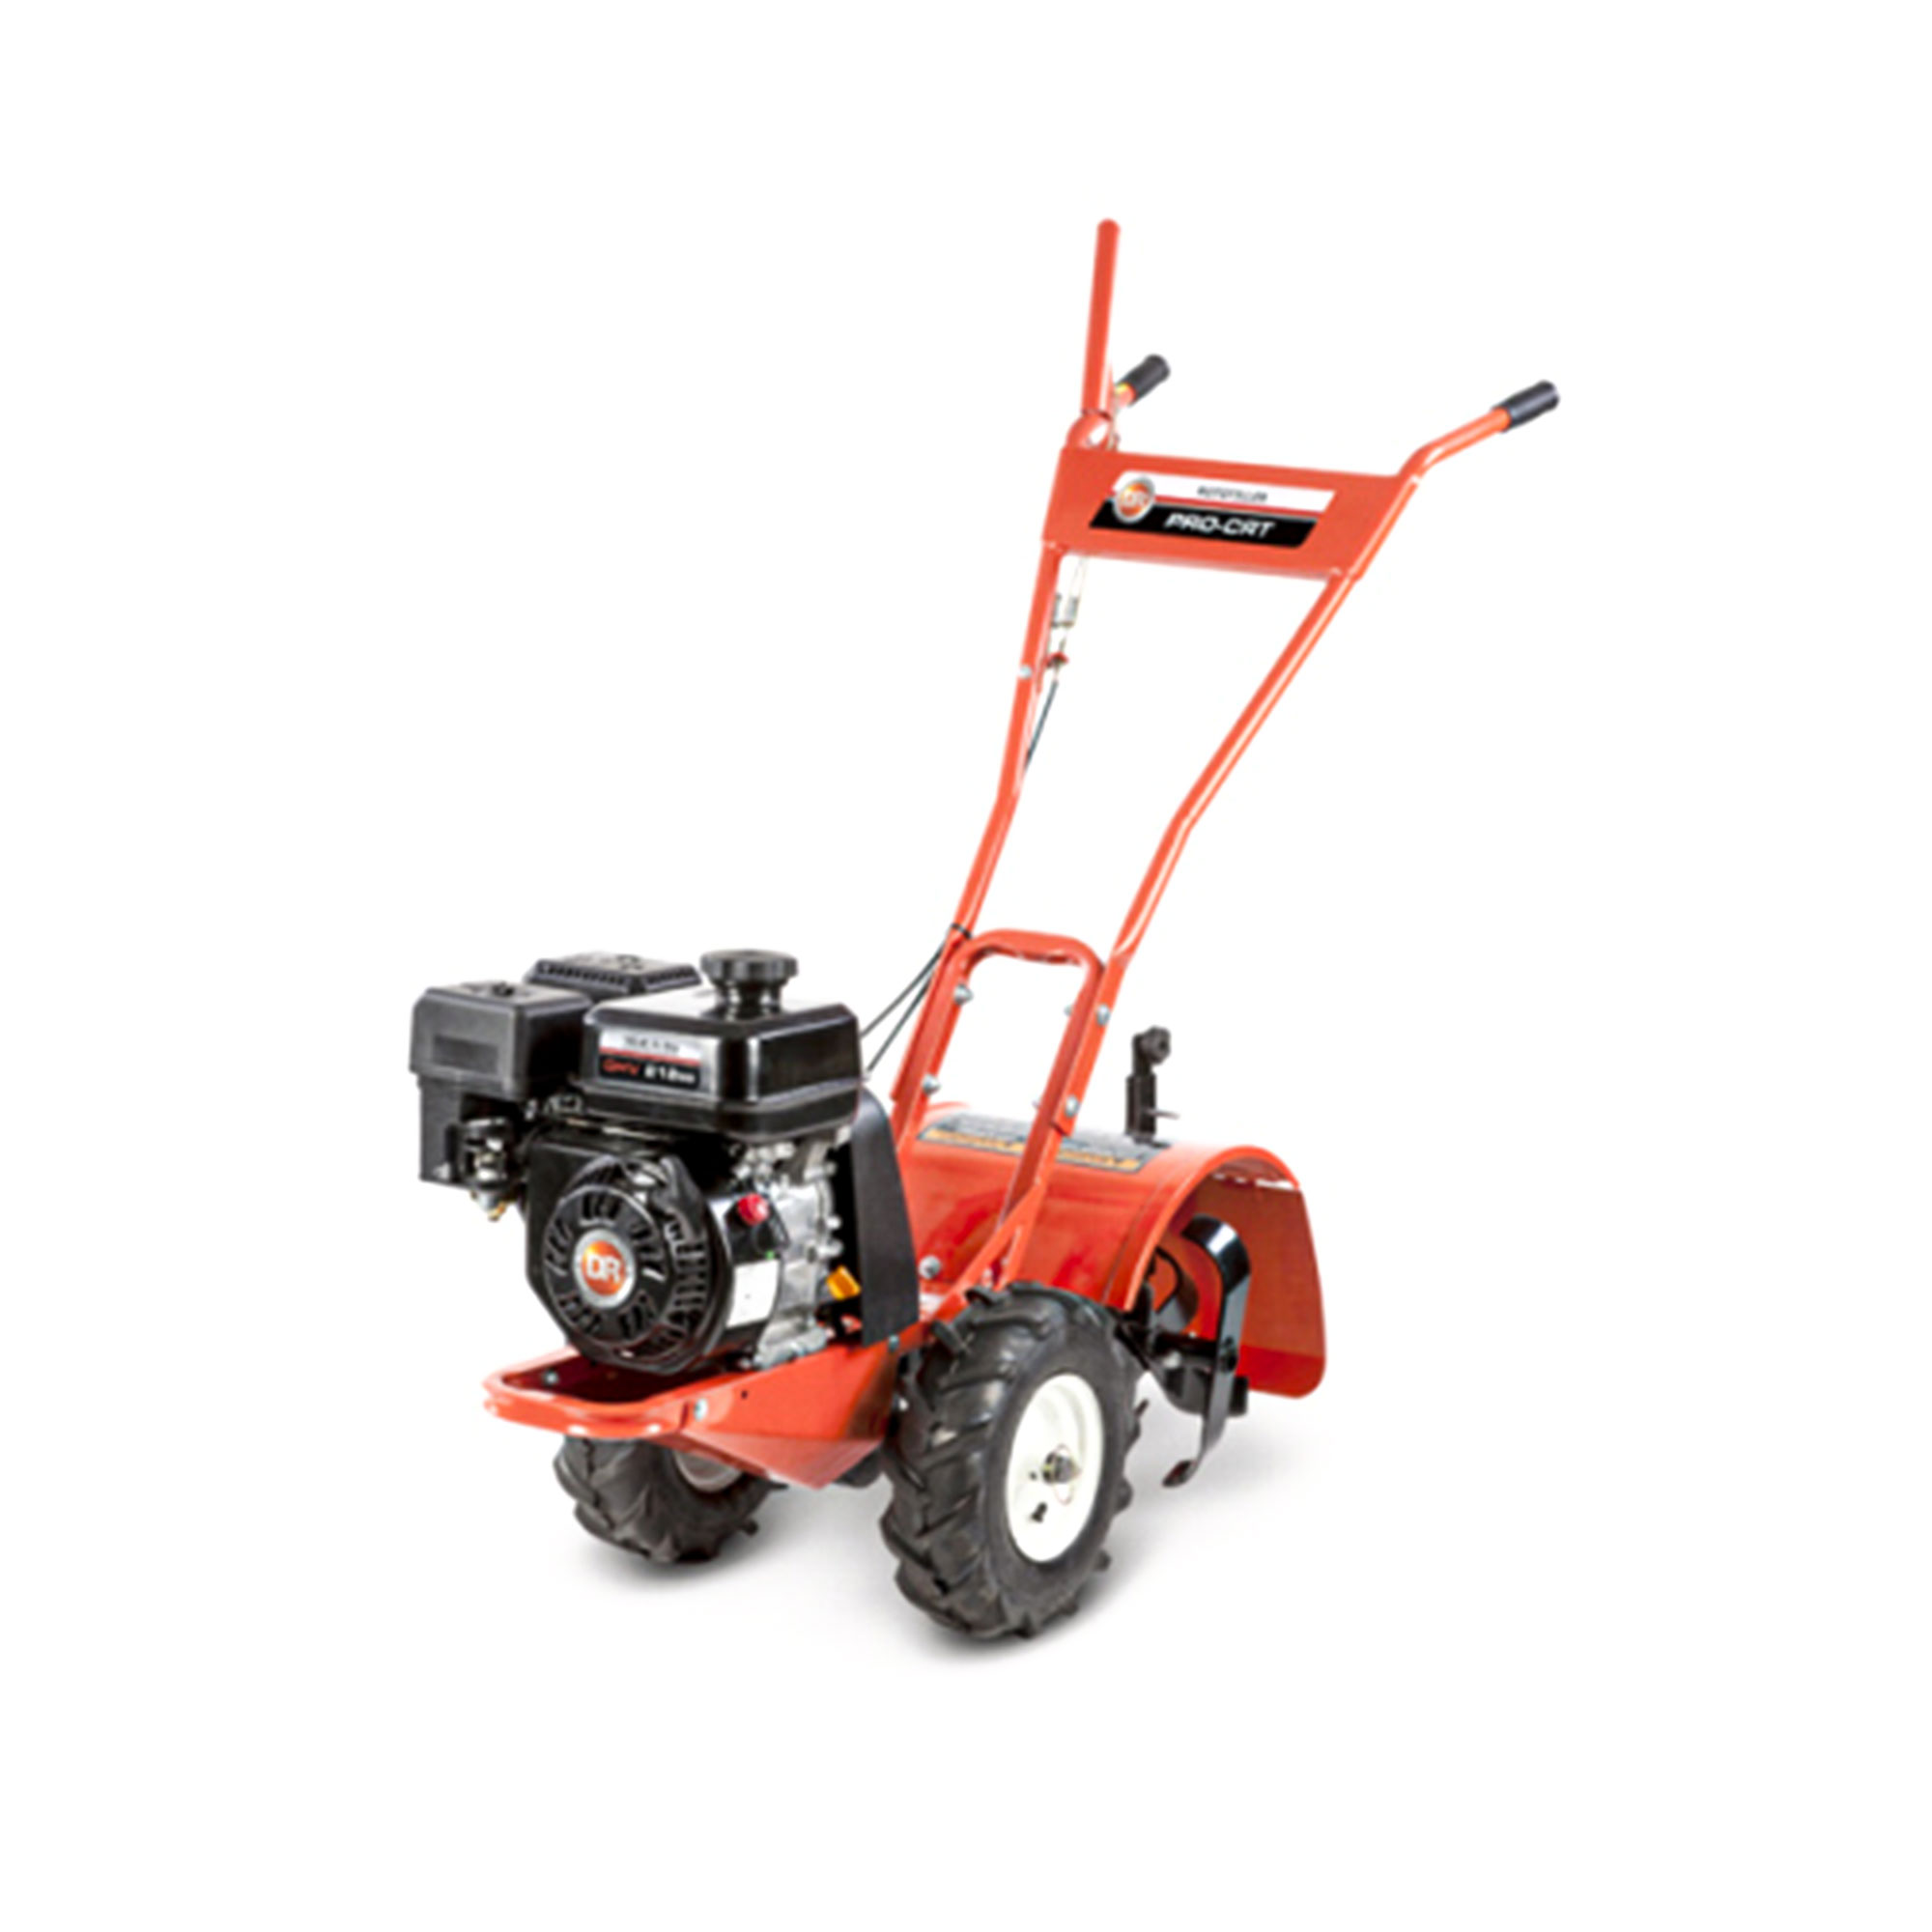 DR 11 Inch Rear Tine Walk Behind Tiller with Counter Rotating Tines, Orange - image 1 of 7